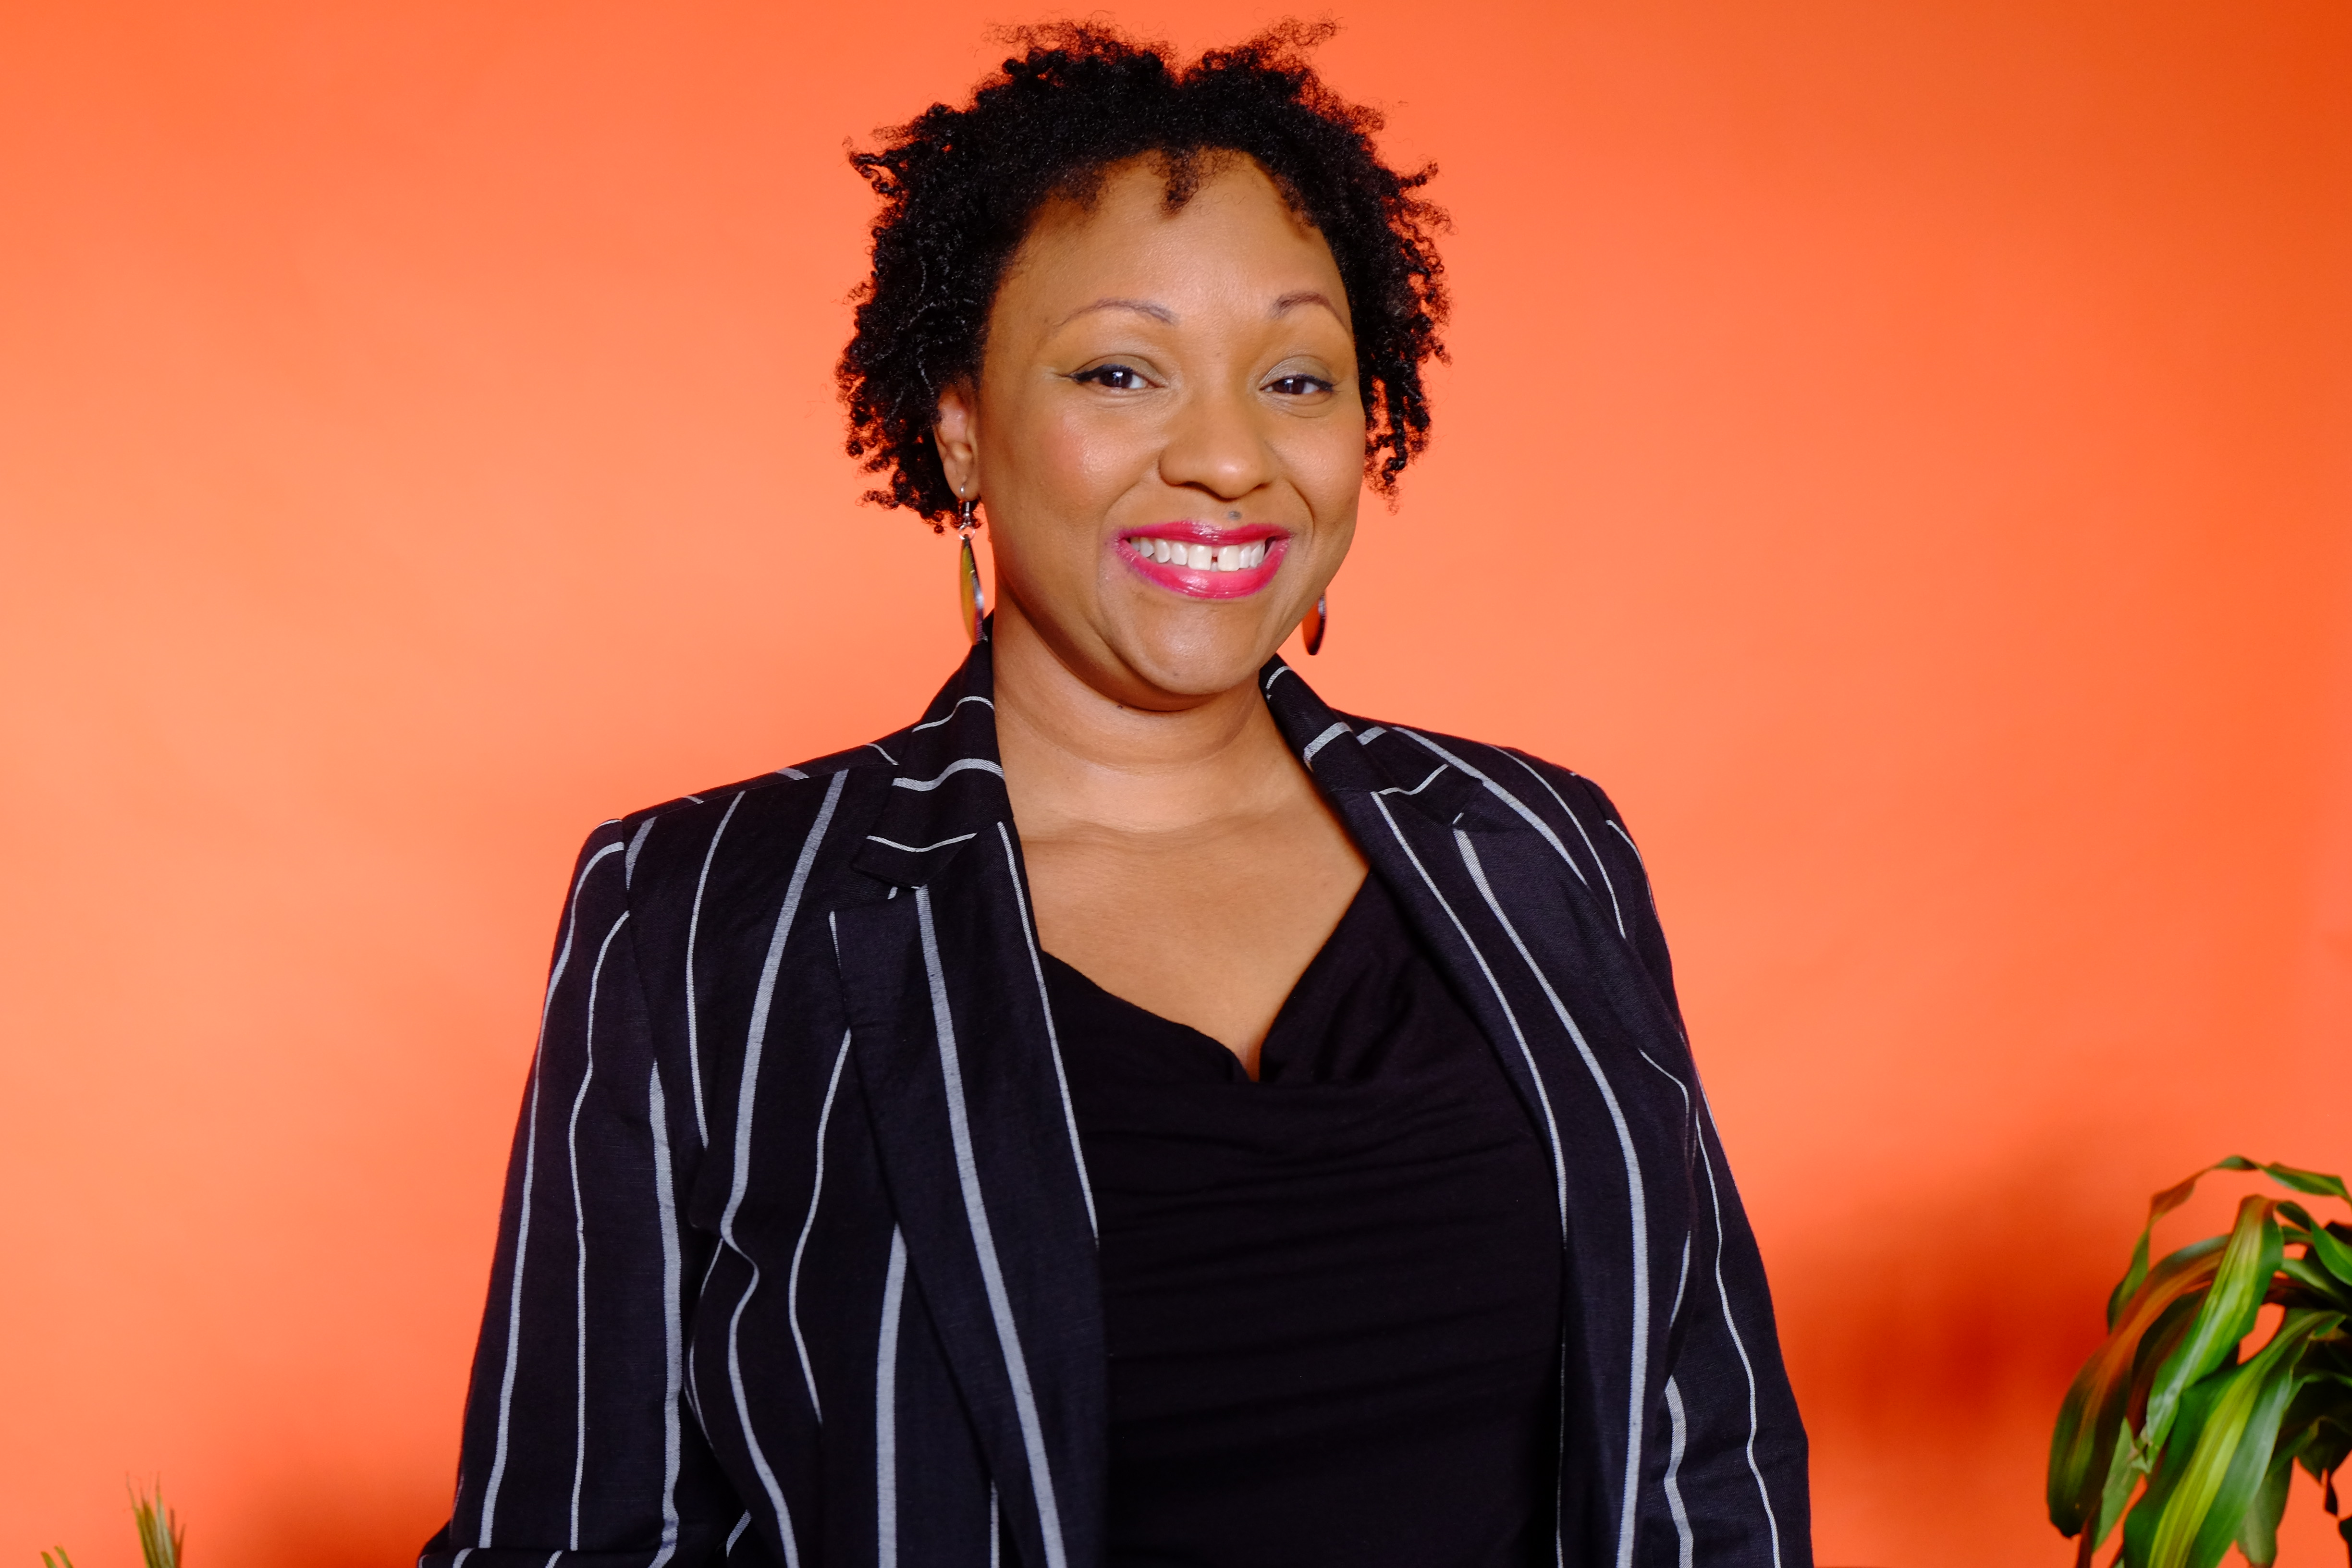 A black woman with curly hair smiling broadly and wearing a black shirt with a black and white striped blazer on an orange background.